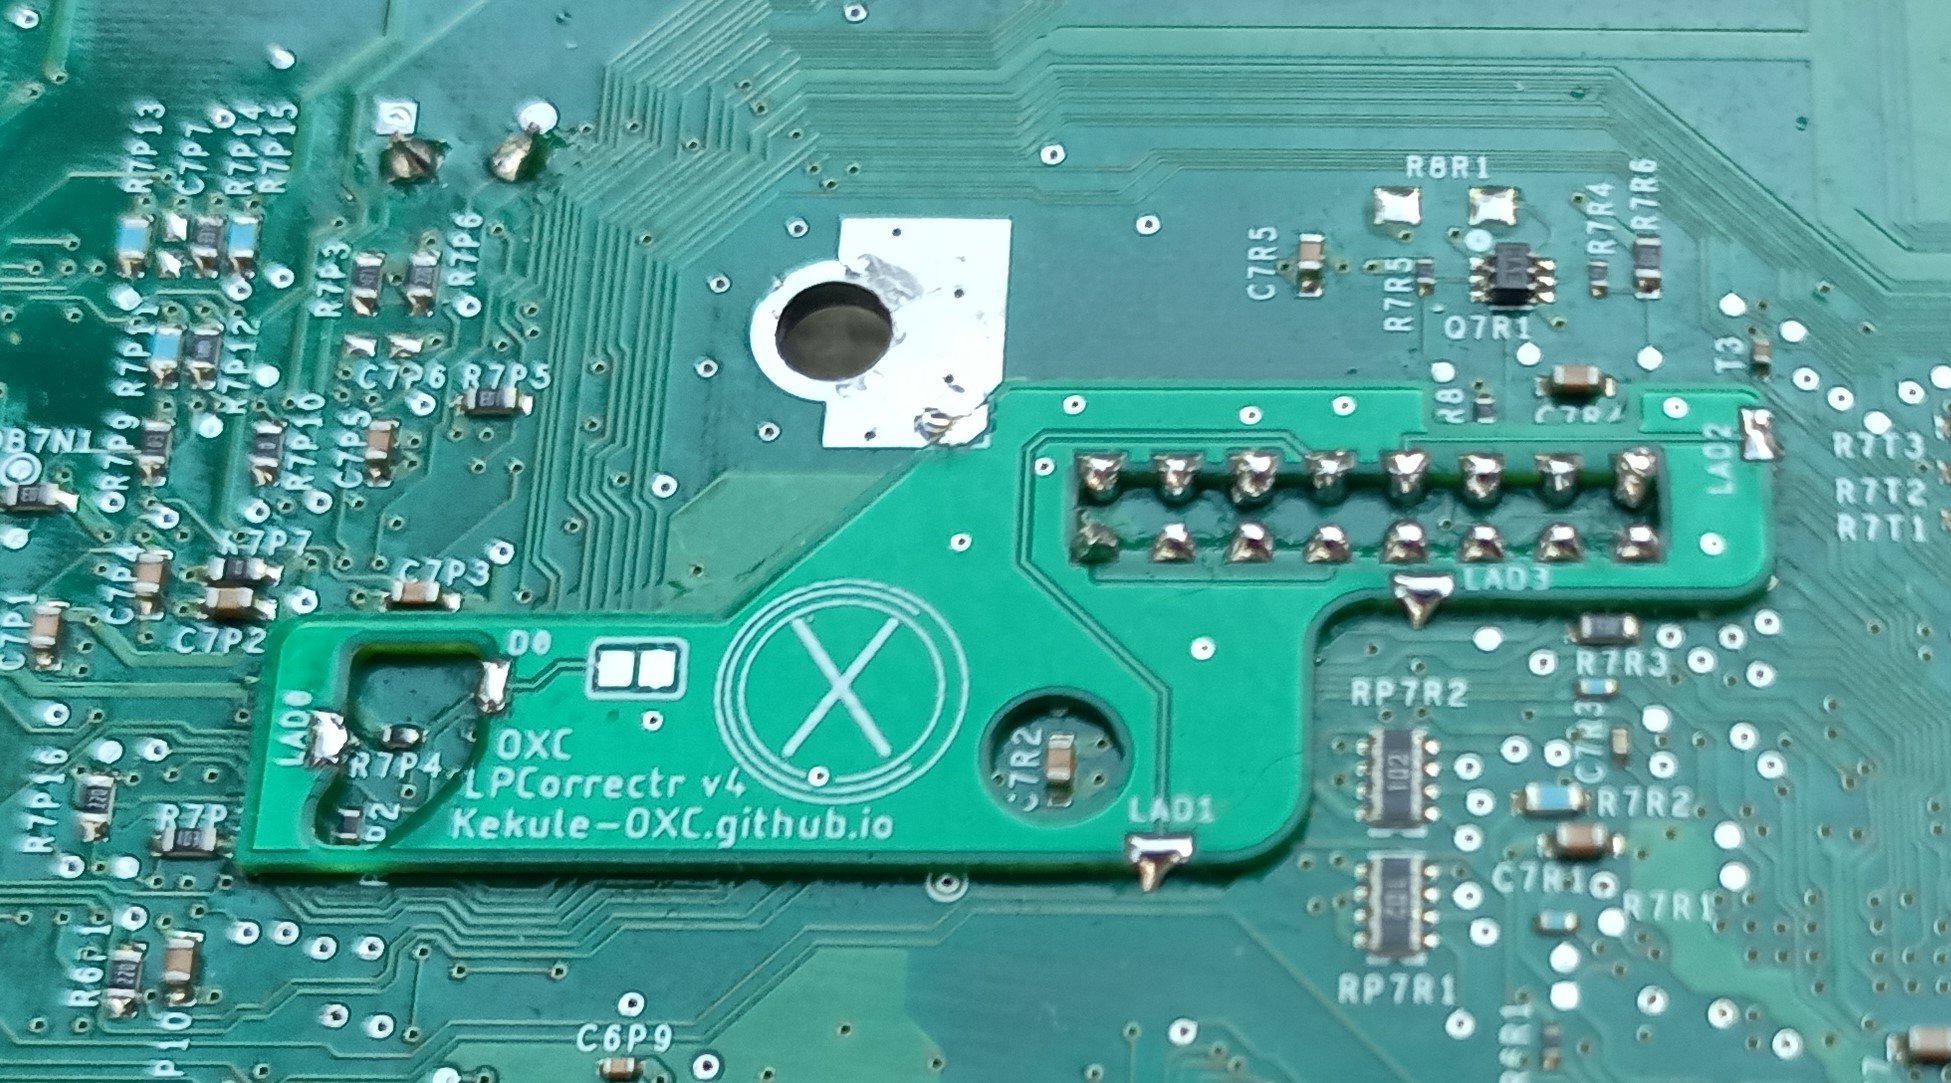 1.6 XBox with OpenXenium and HD+ FRAG Help - Modchips - OGXbox.com